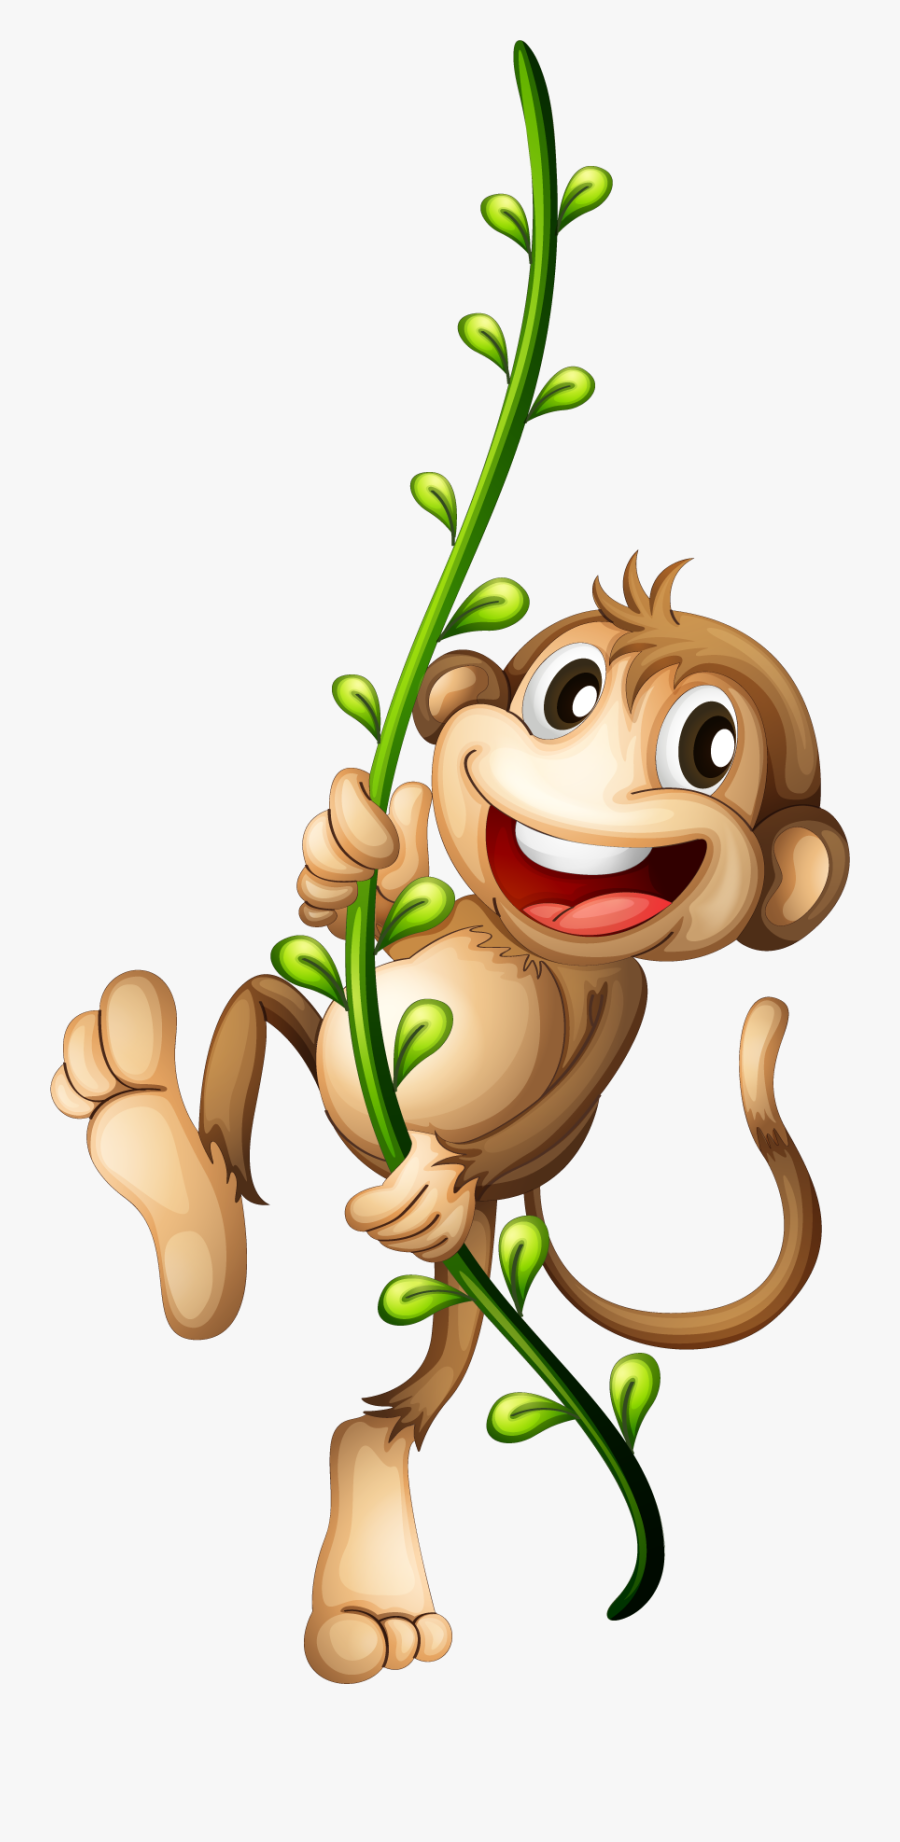 Monkey Clipart Png Image - Monkey Hanging From A Vine, Transparent Clipart